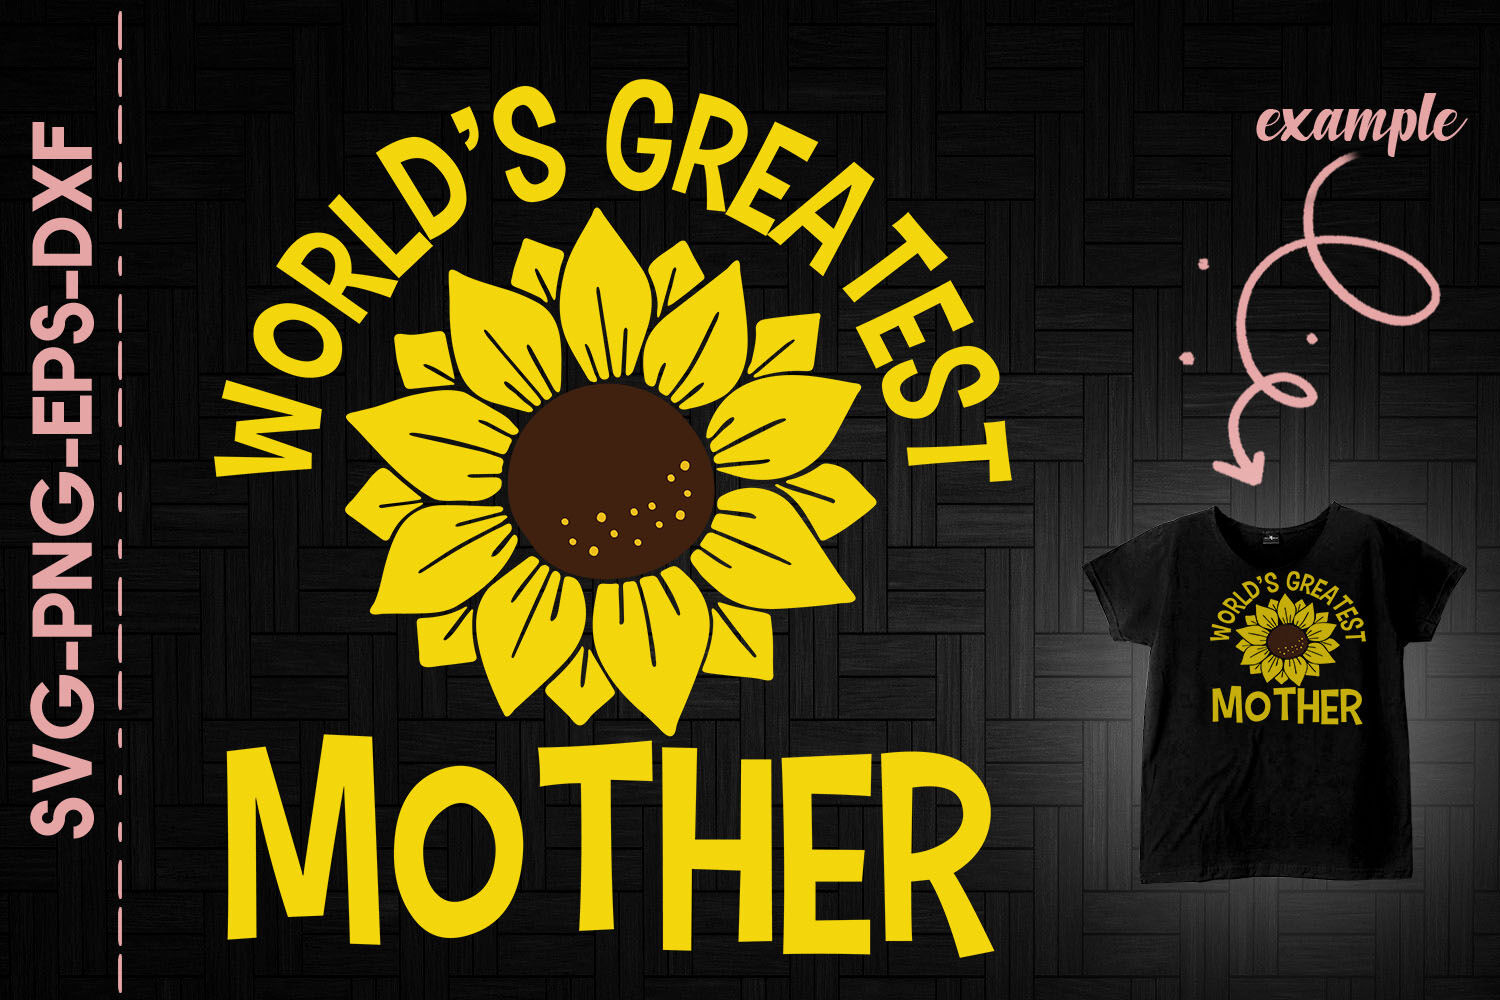 The greatest mother in the world